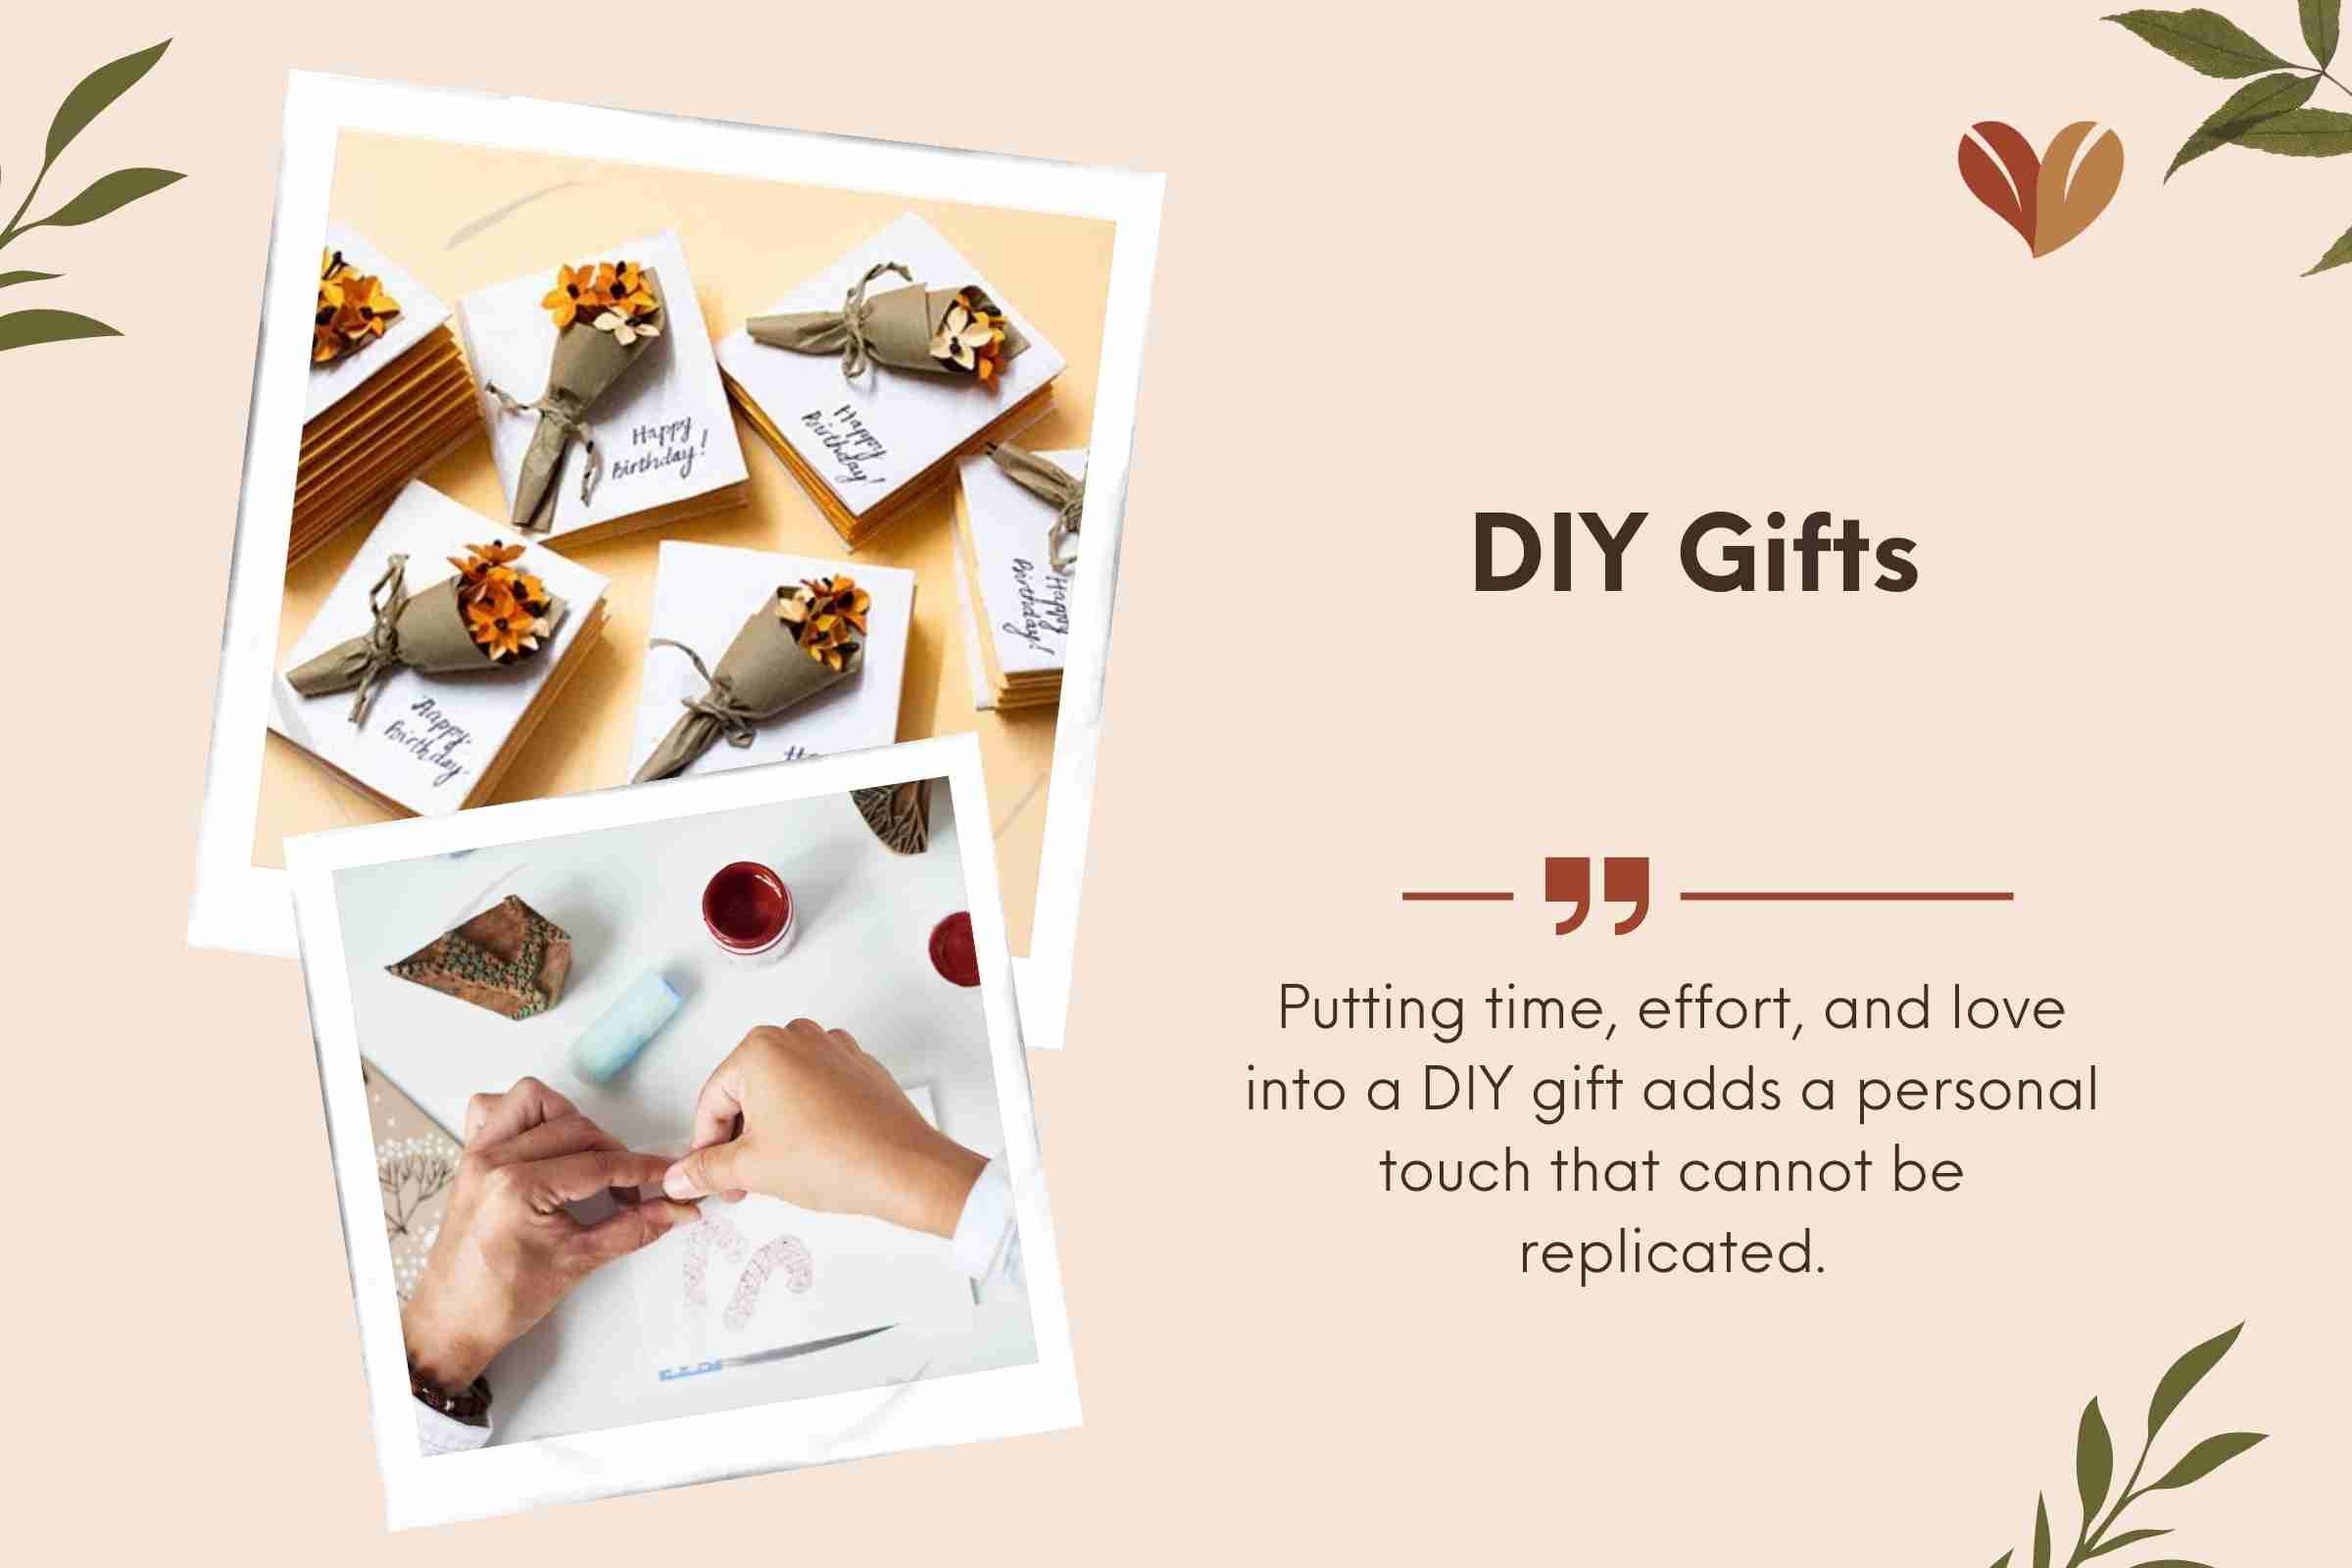 Anniversary Gifts for her - DIY gifts hold sentimental value and are cherished for their heartfelt nature